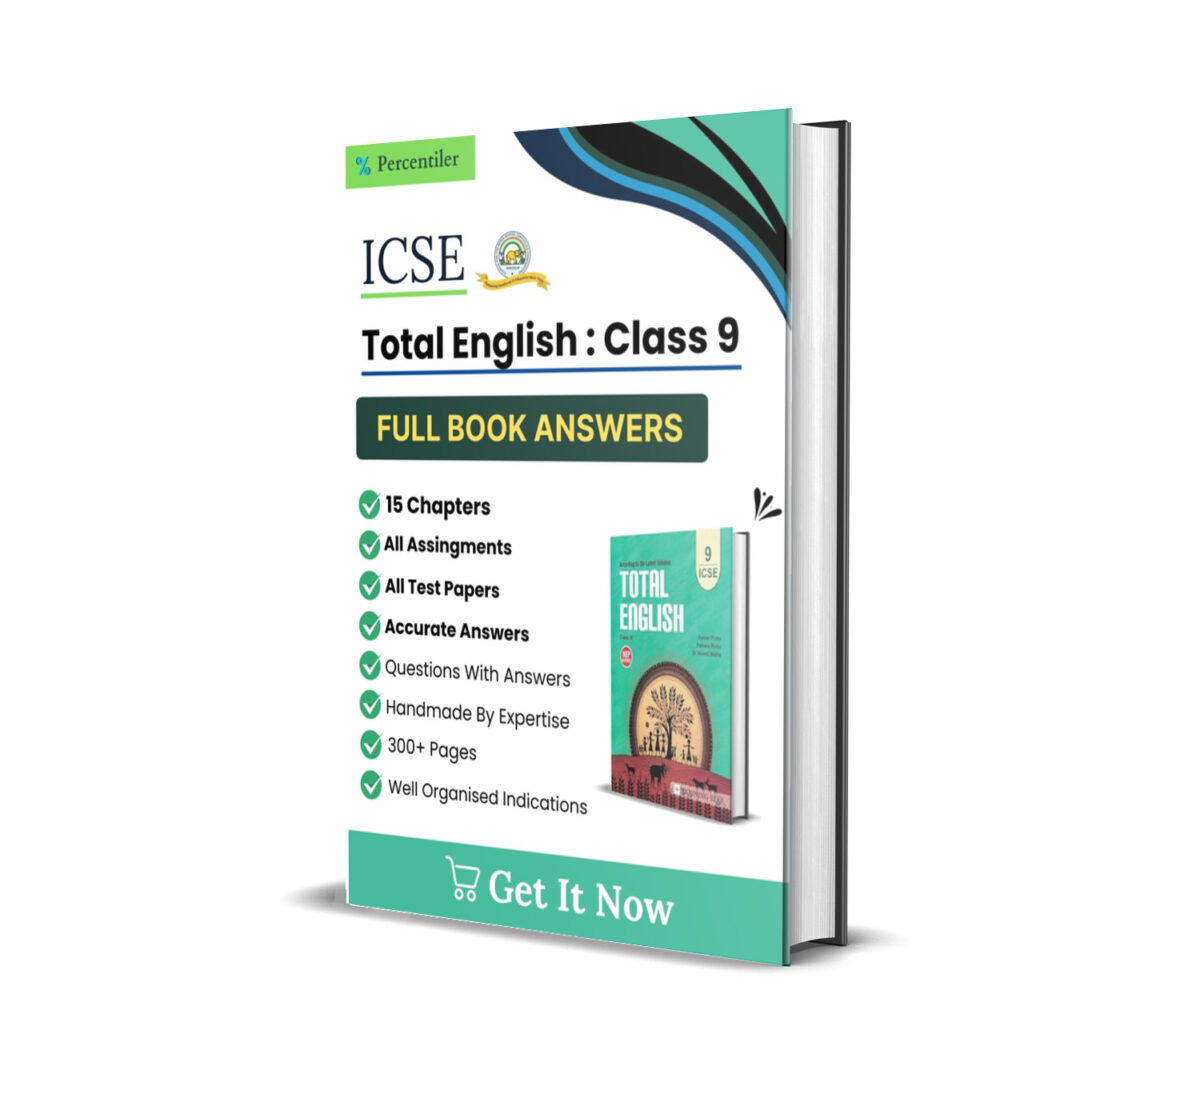 ICSE Total English Class 9 Solution